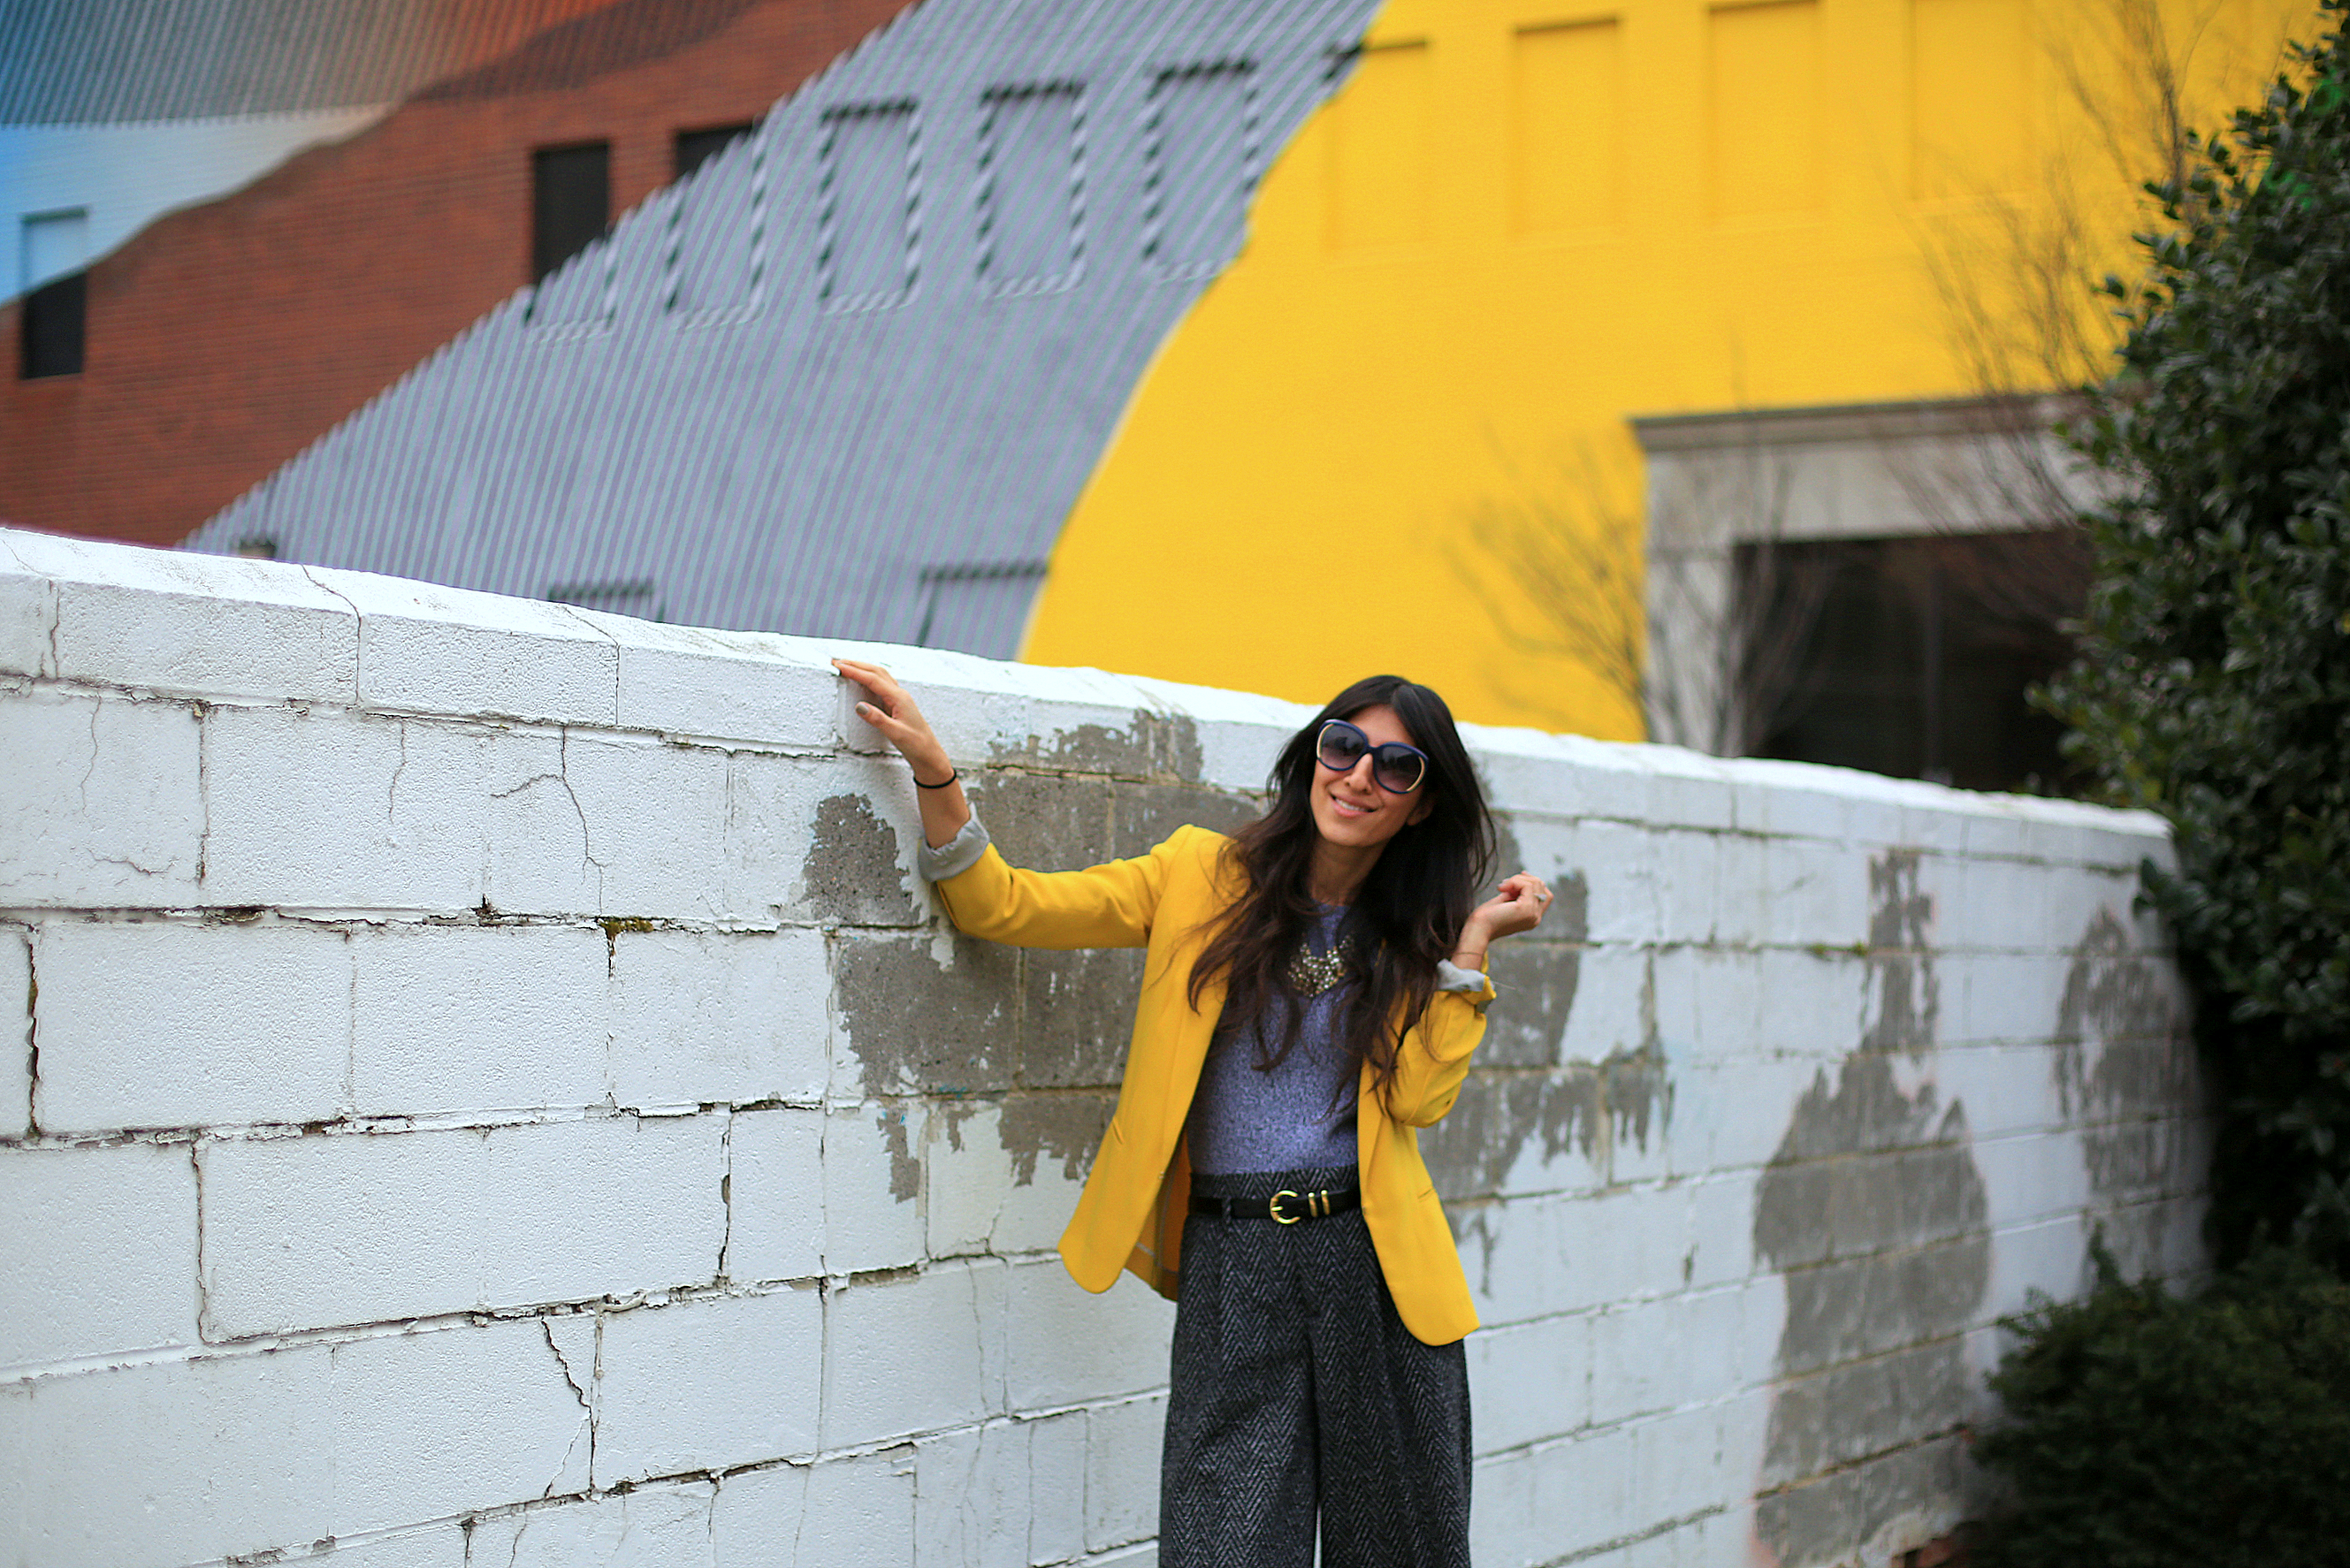 Oh hello lemon yellow! Who says you can't have fun with color unless it's summer? Brighten up your winter neutrals with a bold blazer!